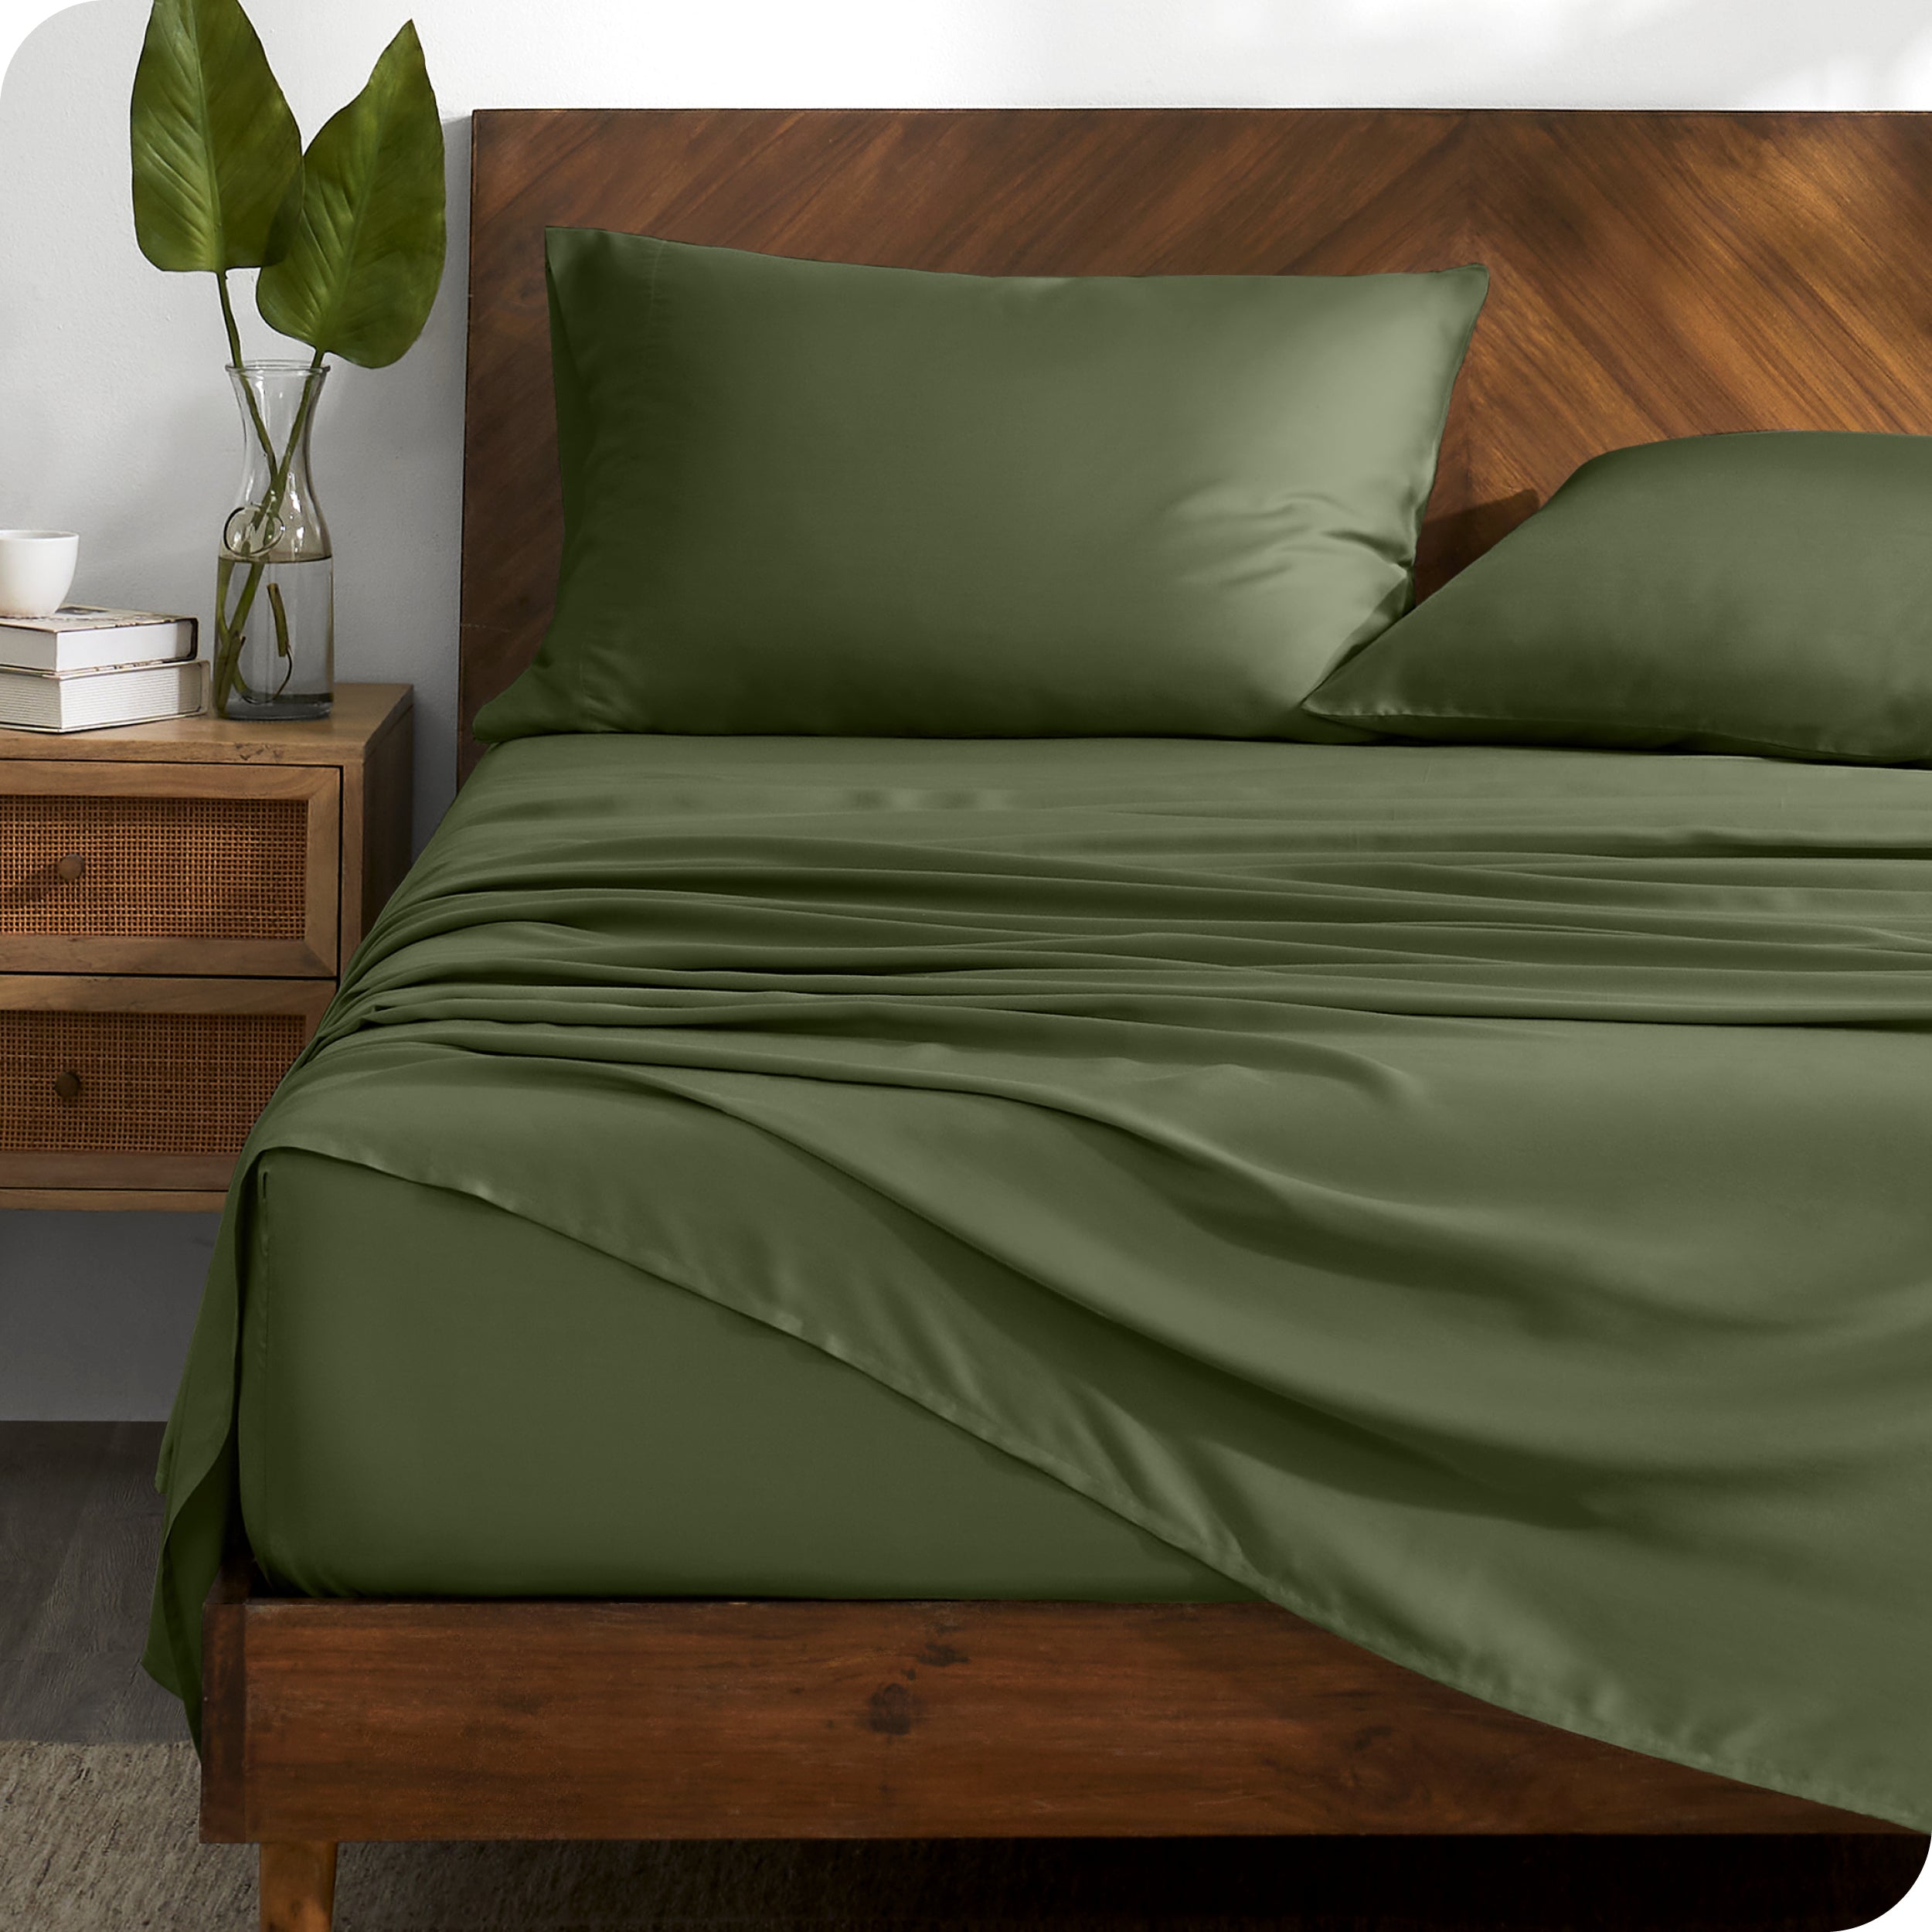 TENCEL™ sheet set on a bed with the flat sheet loosely draped over the top. The mattress is on a wooden bed frame.